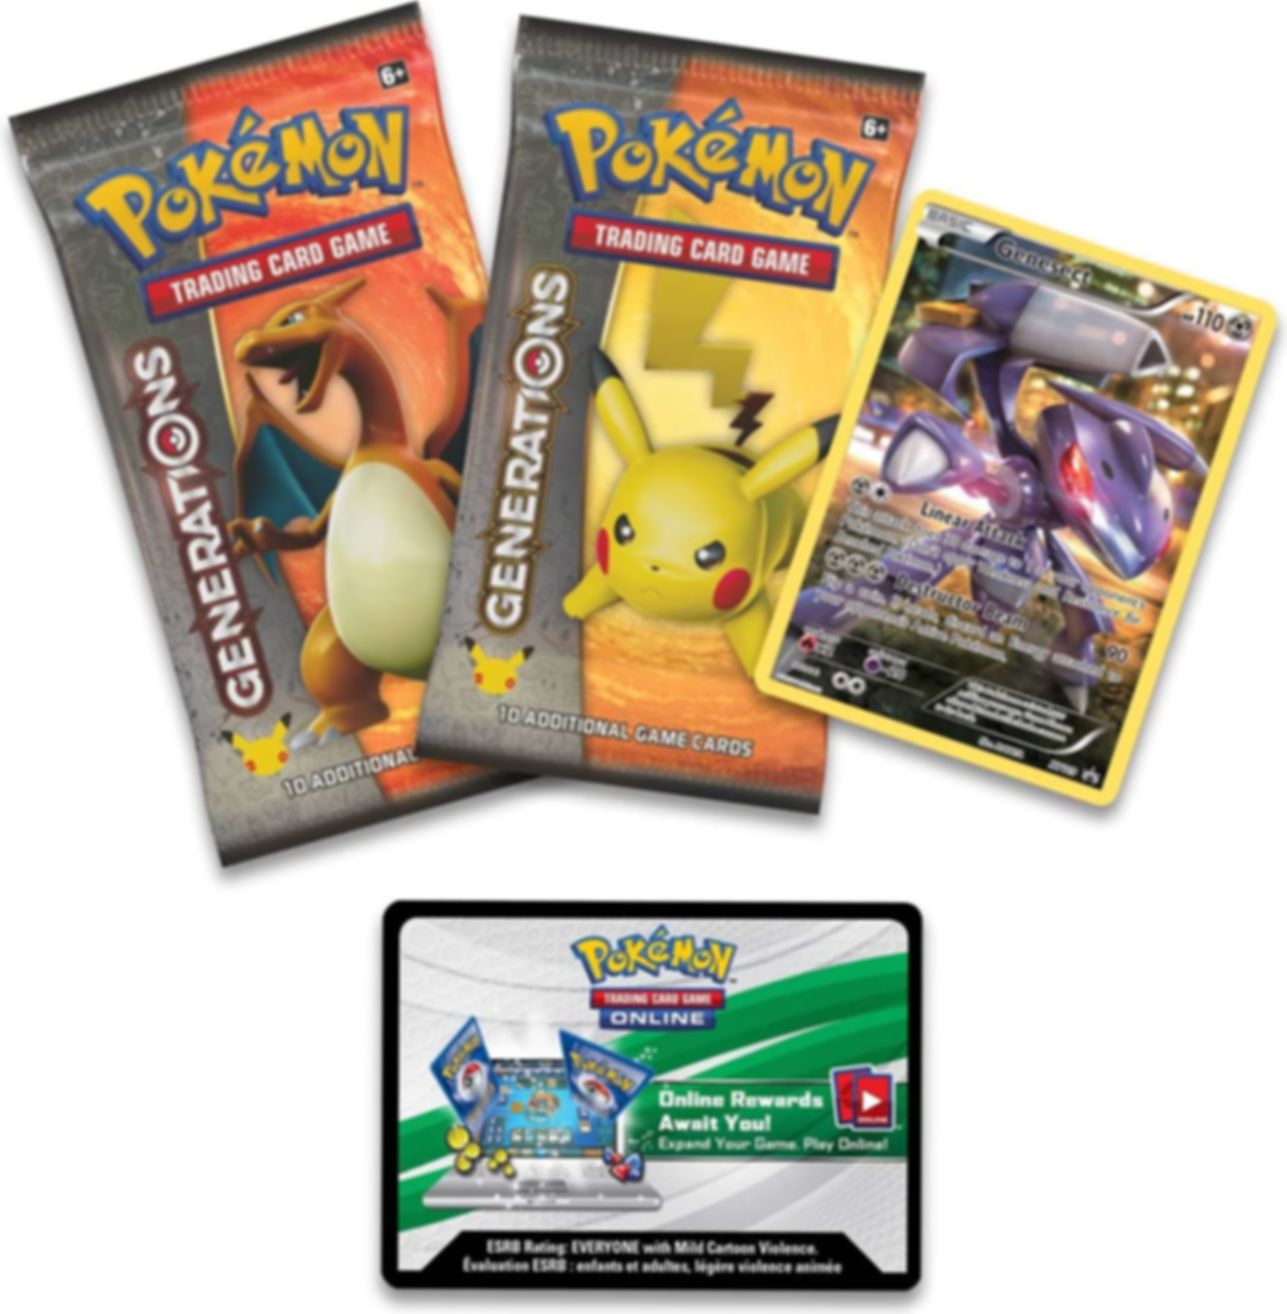 Pokémon Genesect Mythical Cards Collection Box komponenten